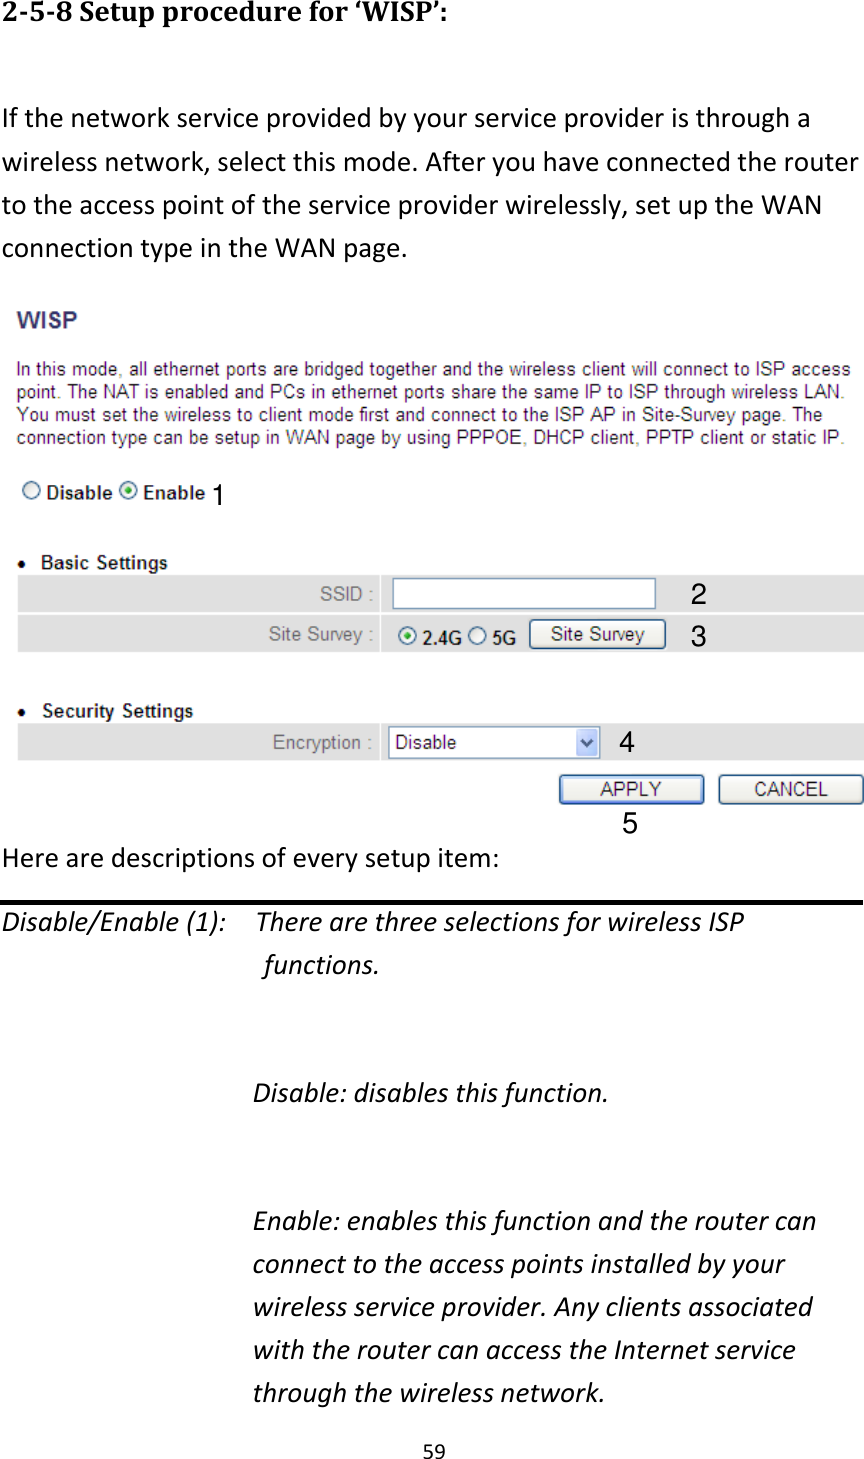 59 2-5-8 Setup procedure for ‘WISP’:  If the network service provided by your service provider is through a wireless network, select this mode. After you have connected the router to the access point of the service provider wirelessly, set up the WAN connection type in the WAN page.  Here are descriptions of every setup item: Disable/Enable (1):    There are three selections for wireless ISP                                     functions.  Disable: disables this function.  Enable: enables this function and the router can connect to the access points installed by your wireless service provider. Any clients associated with the router can access the Internet service through the wireless network. 1 2 3 4 5 